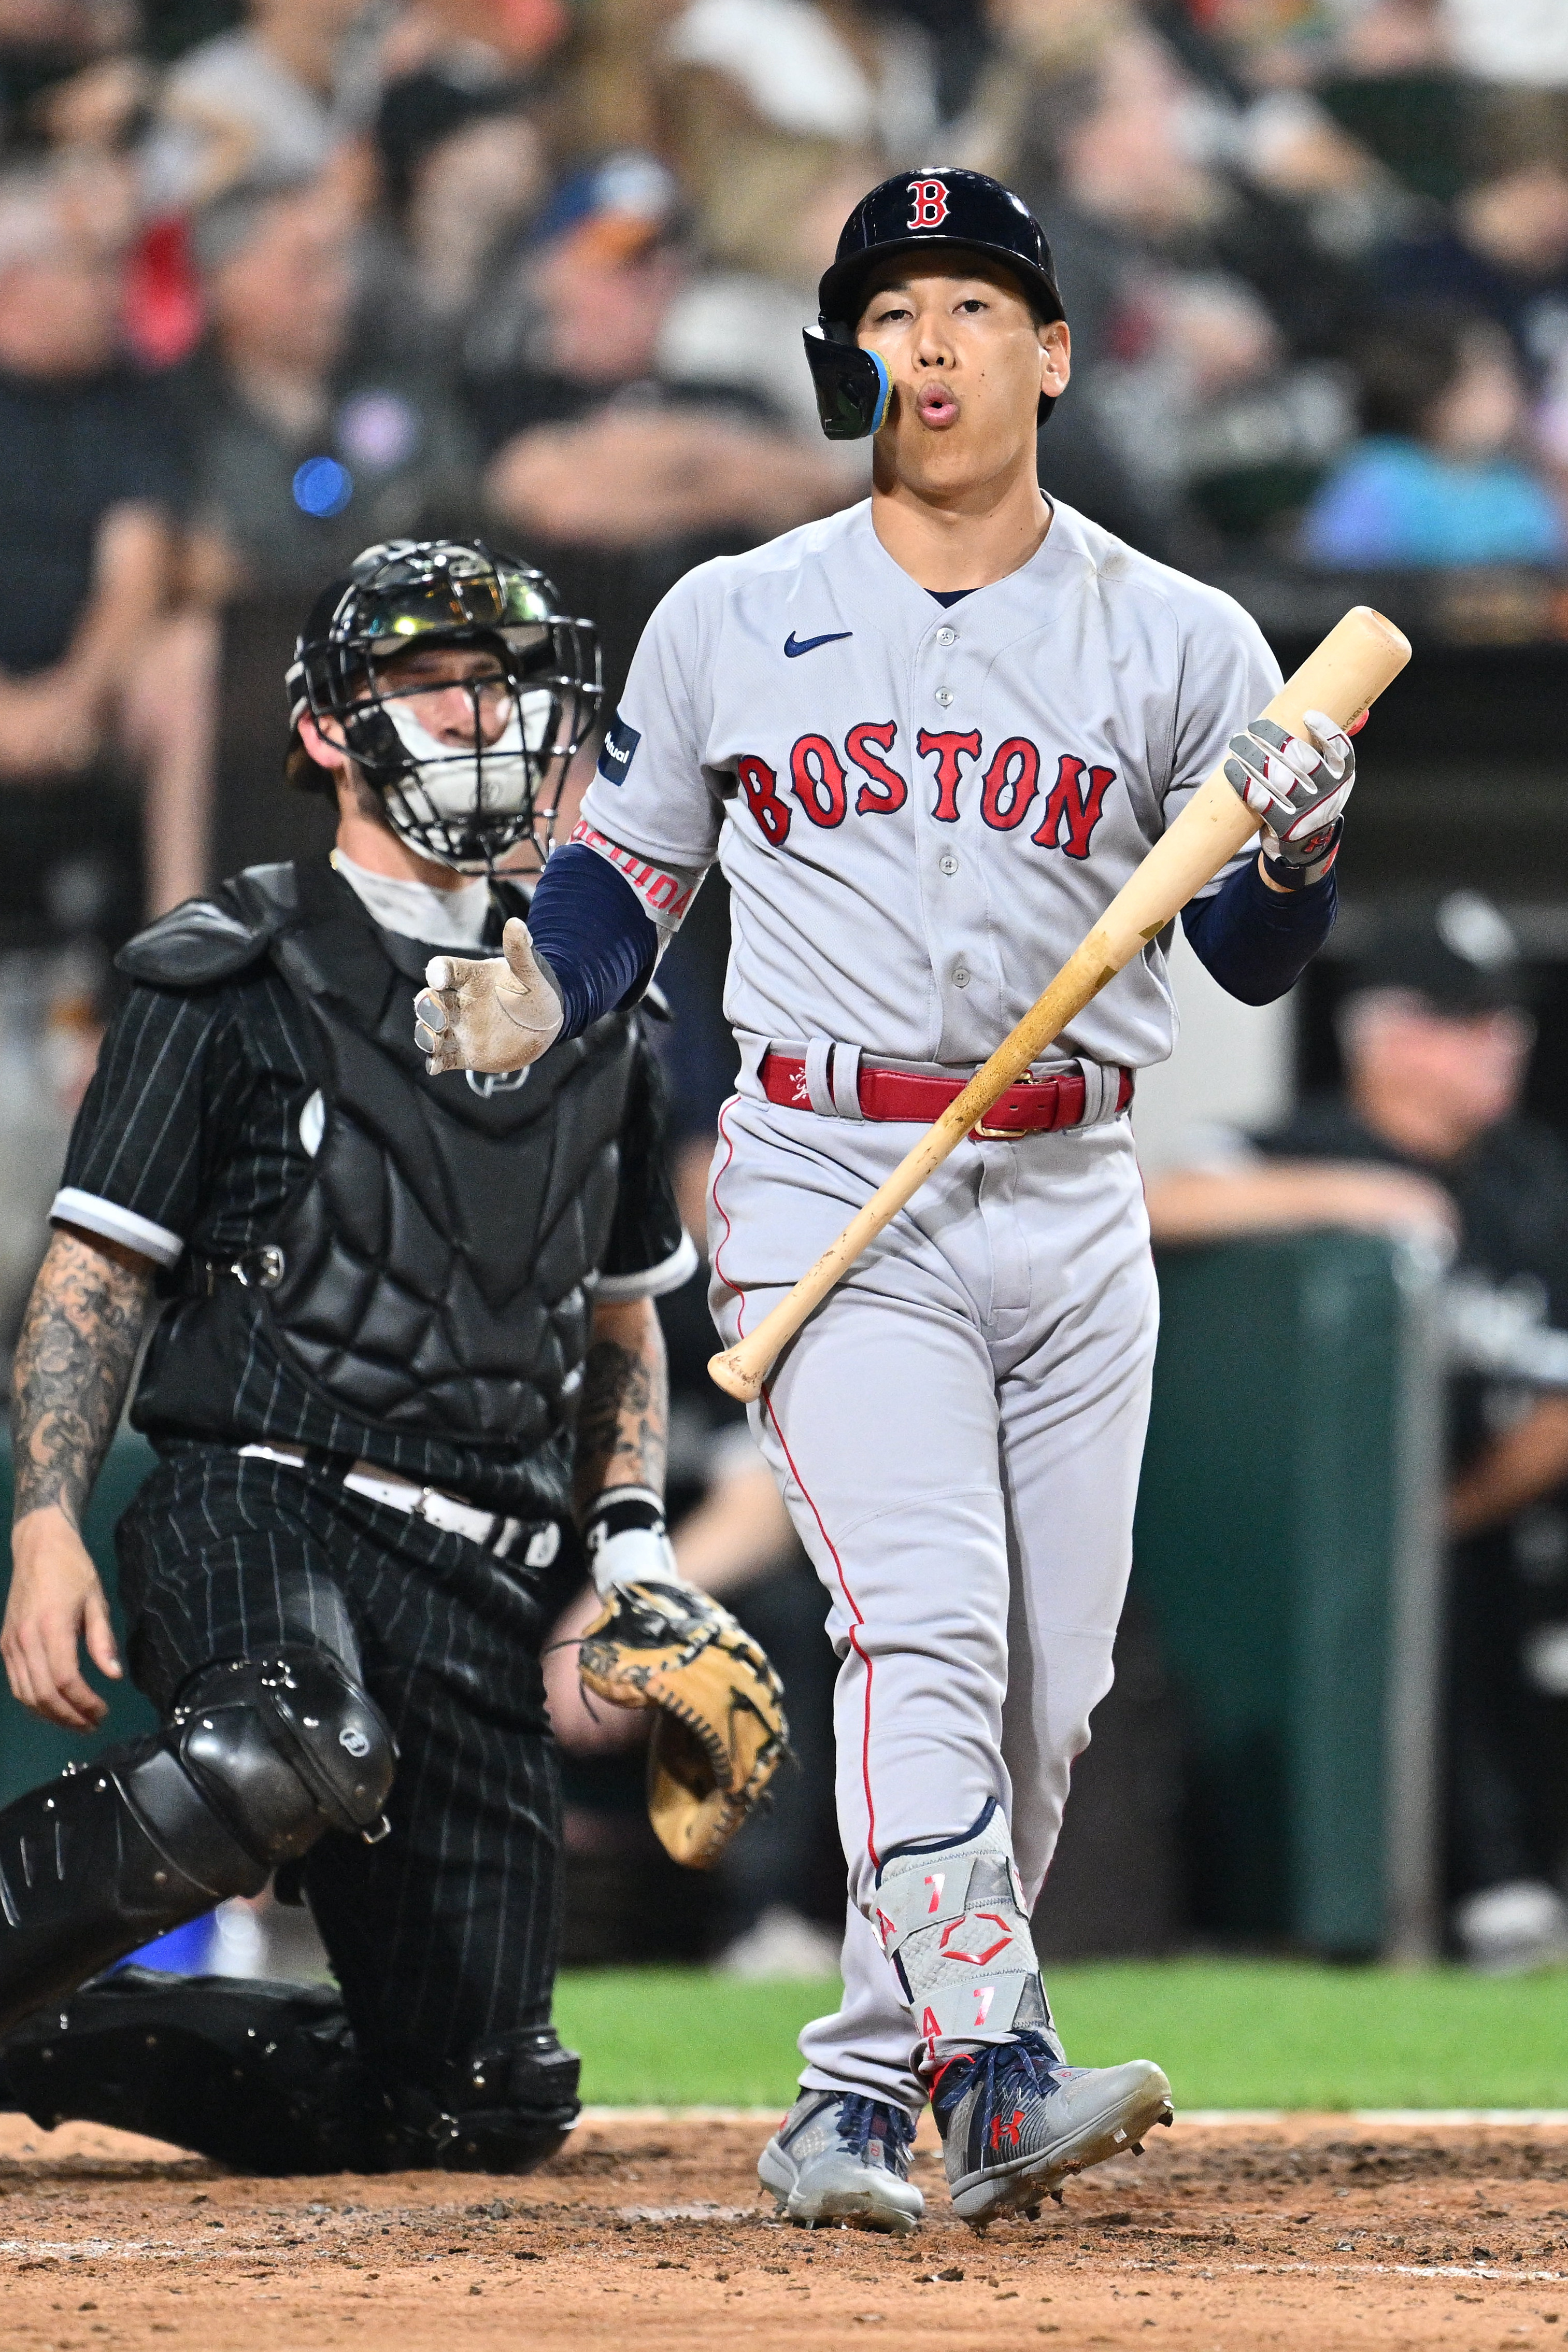 Brayan Bello's effective outing leads Red Sox past White Sox